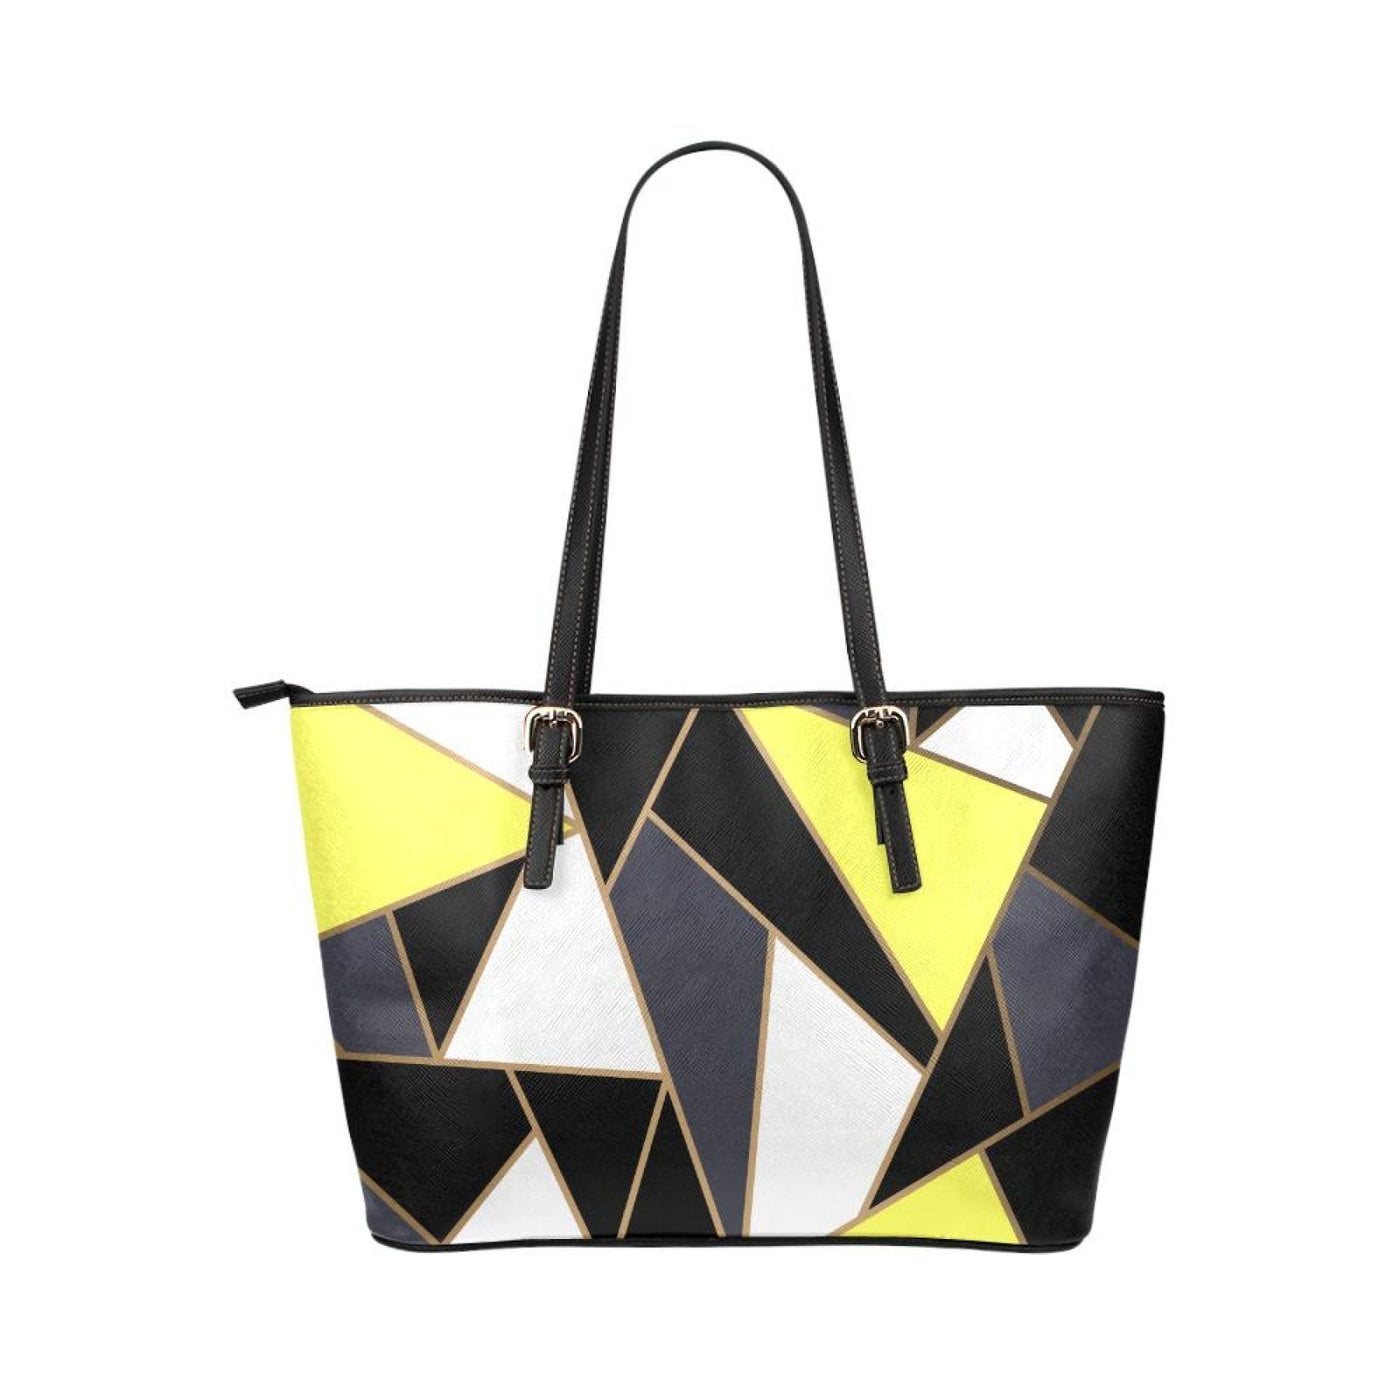 Large Leather Tote Shoulder Bag - Black And Yellow Pattern B3554175 - Bags |